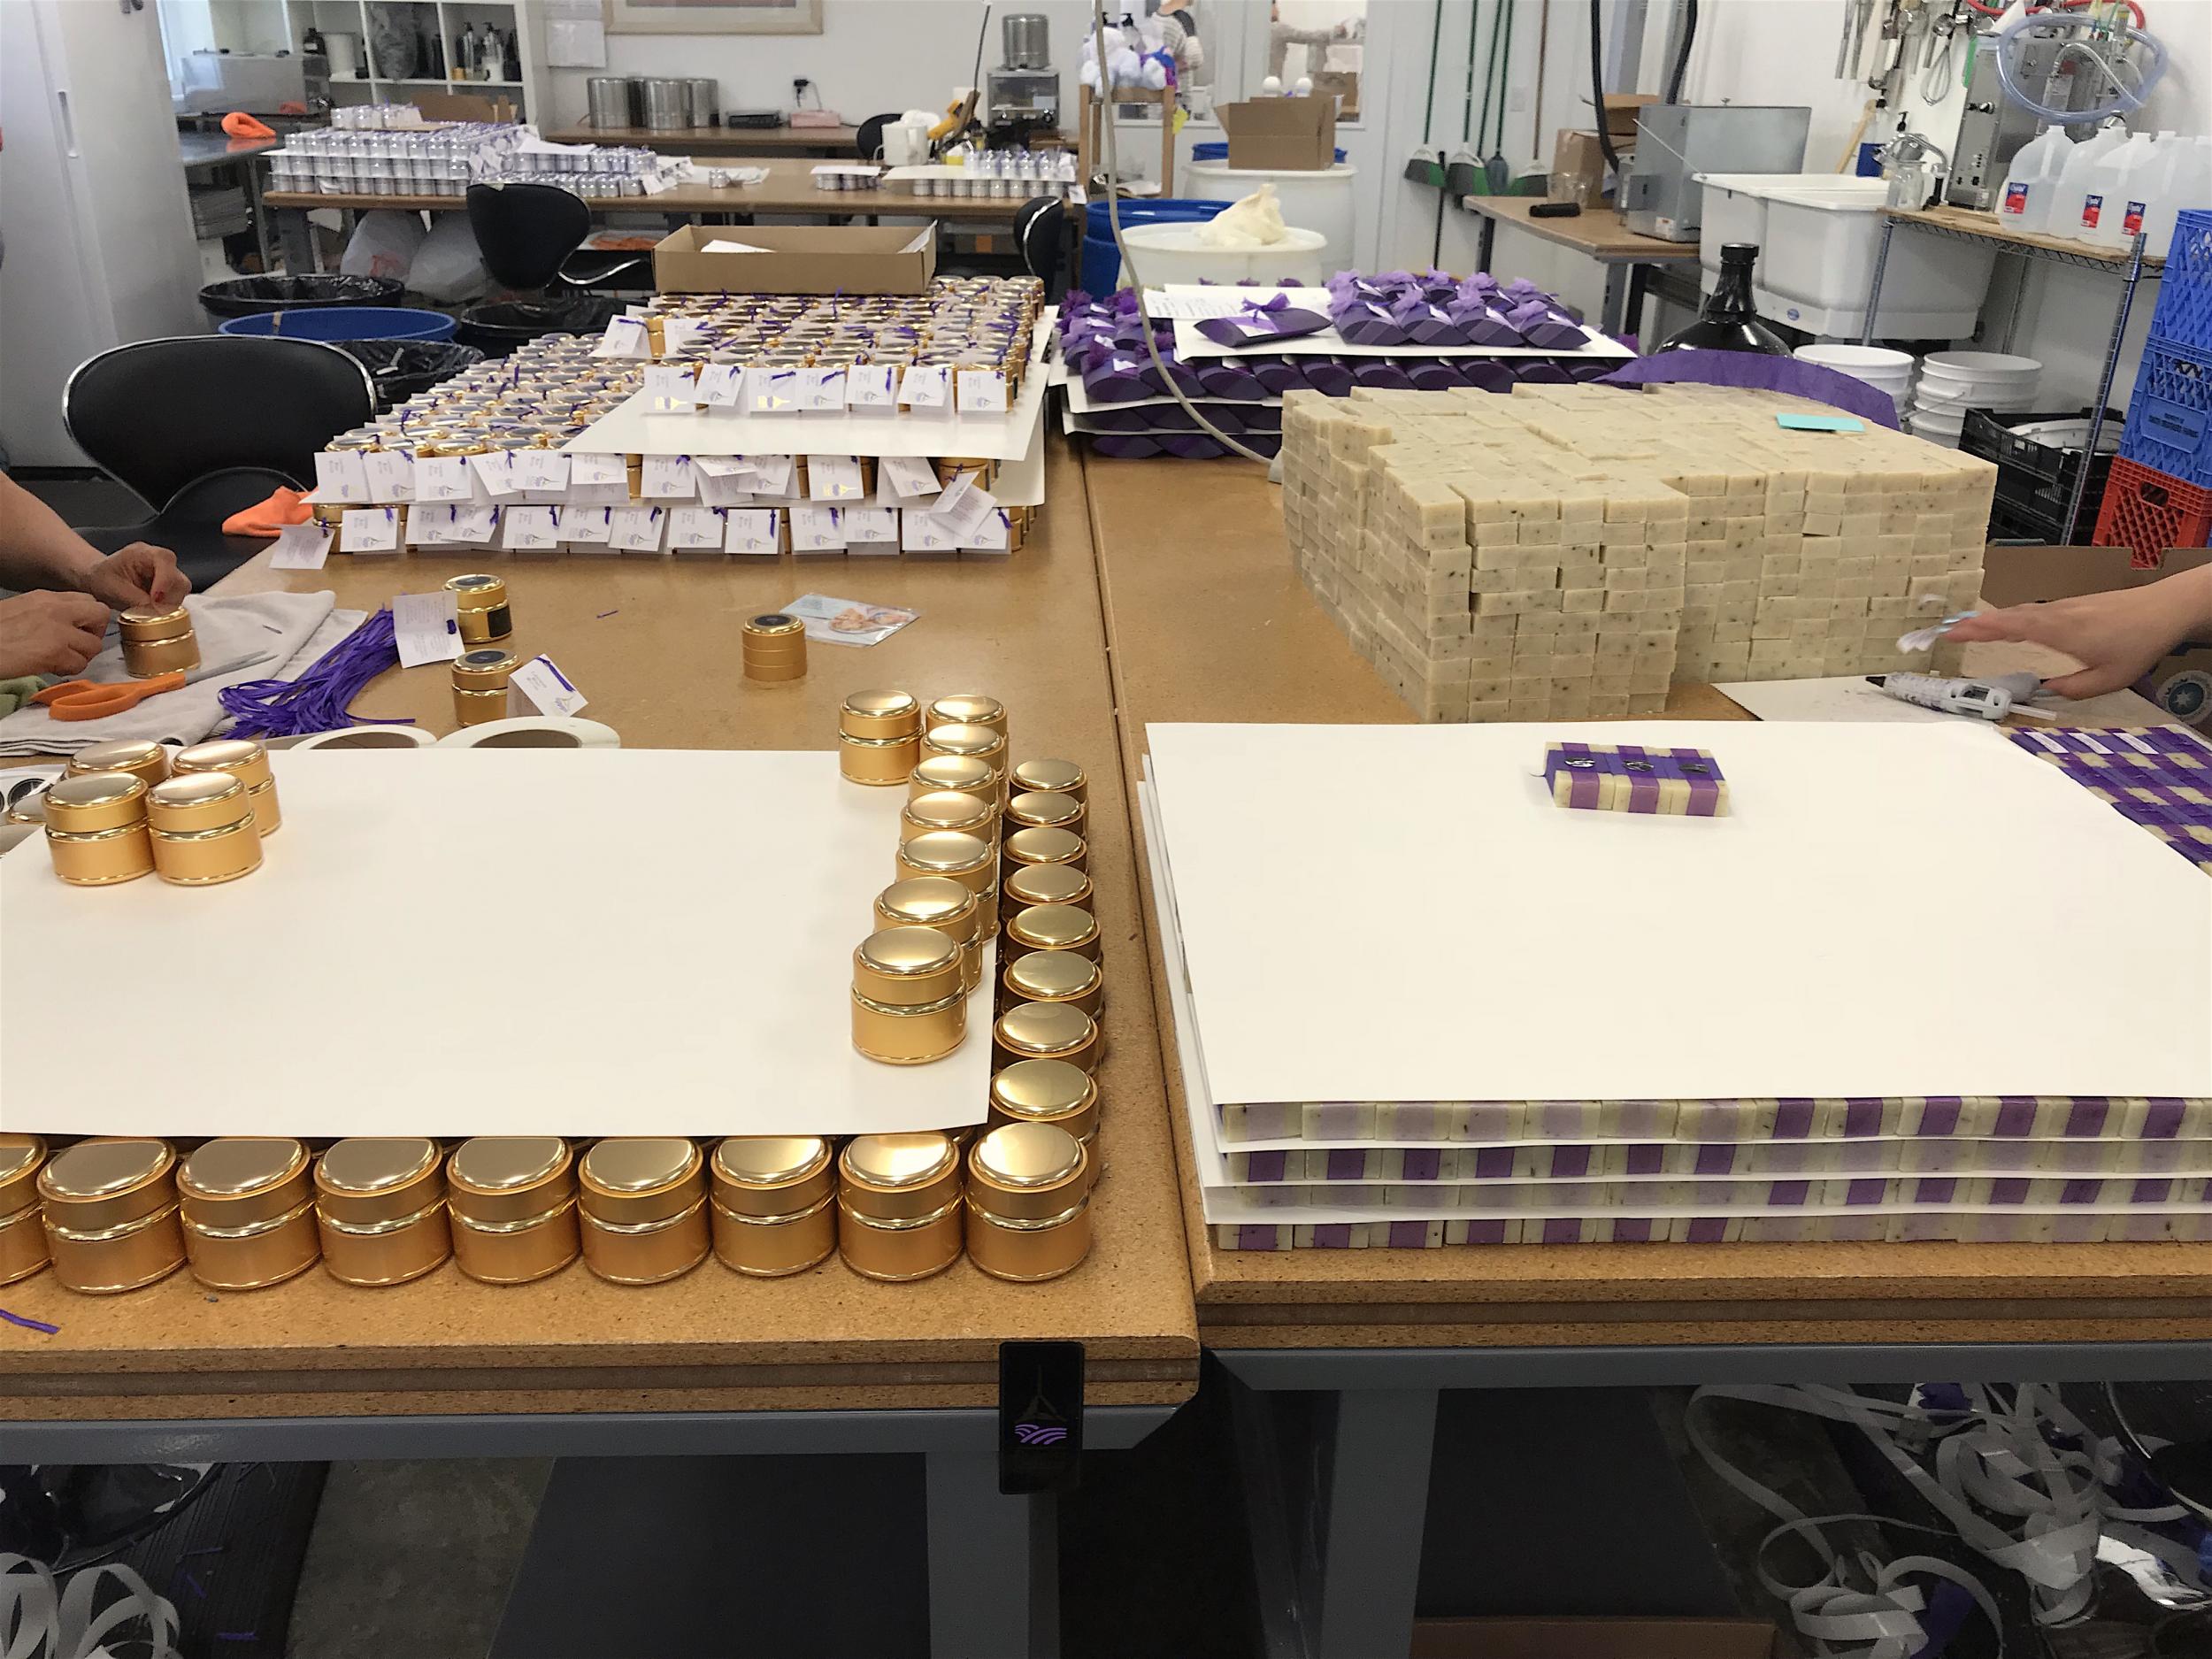 Packaging day at the manufacturing plant